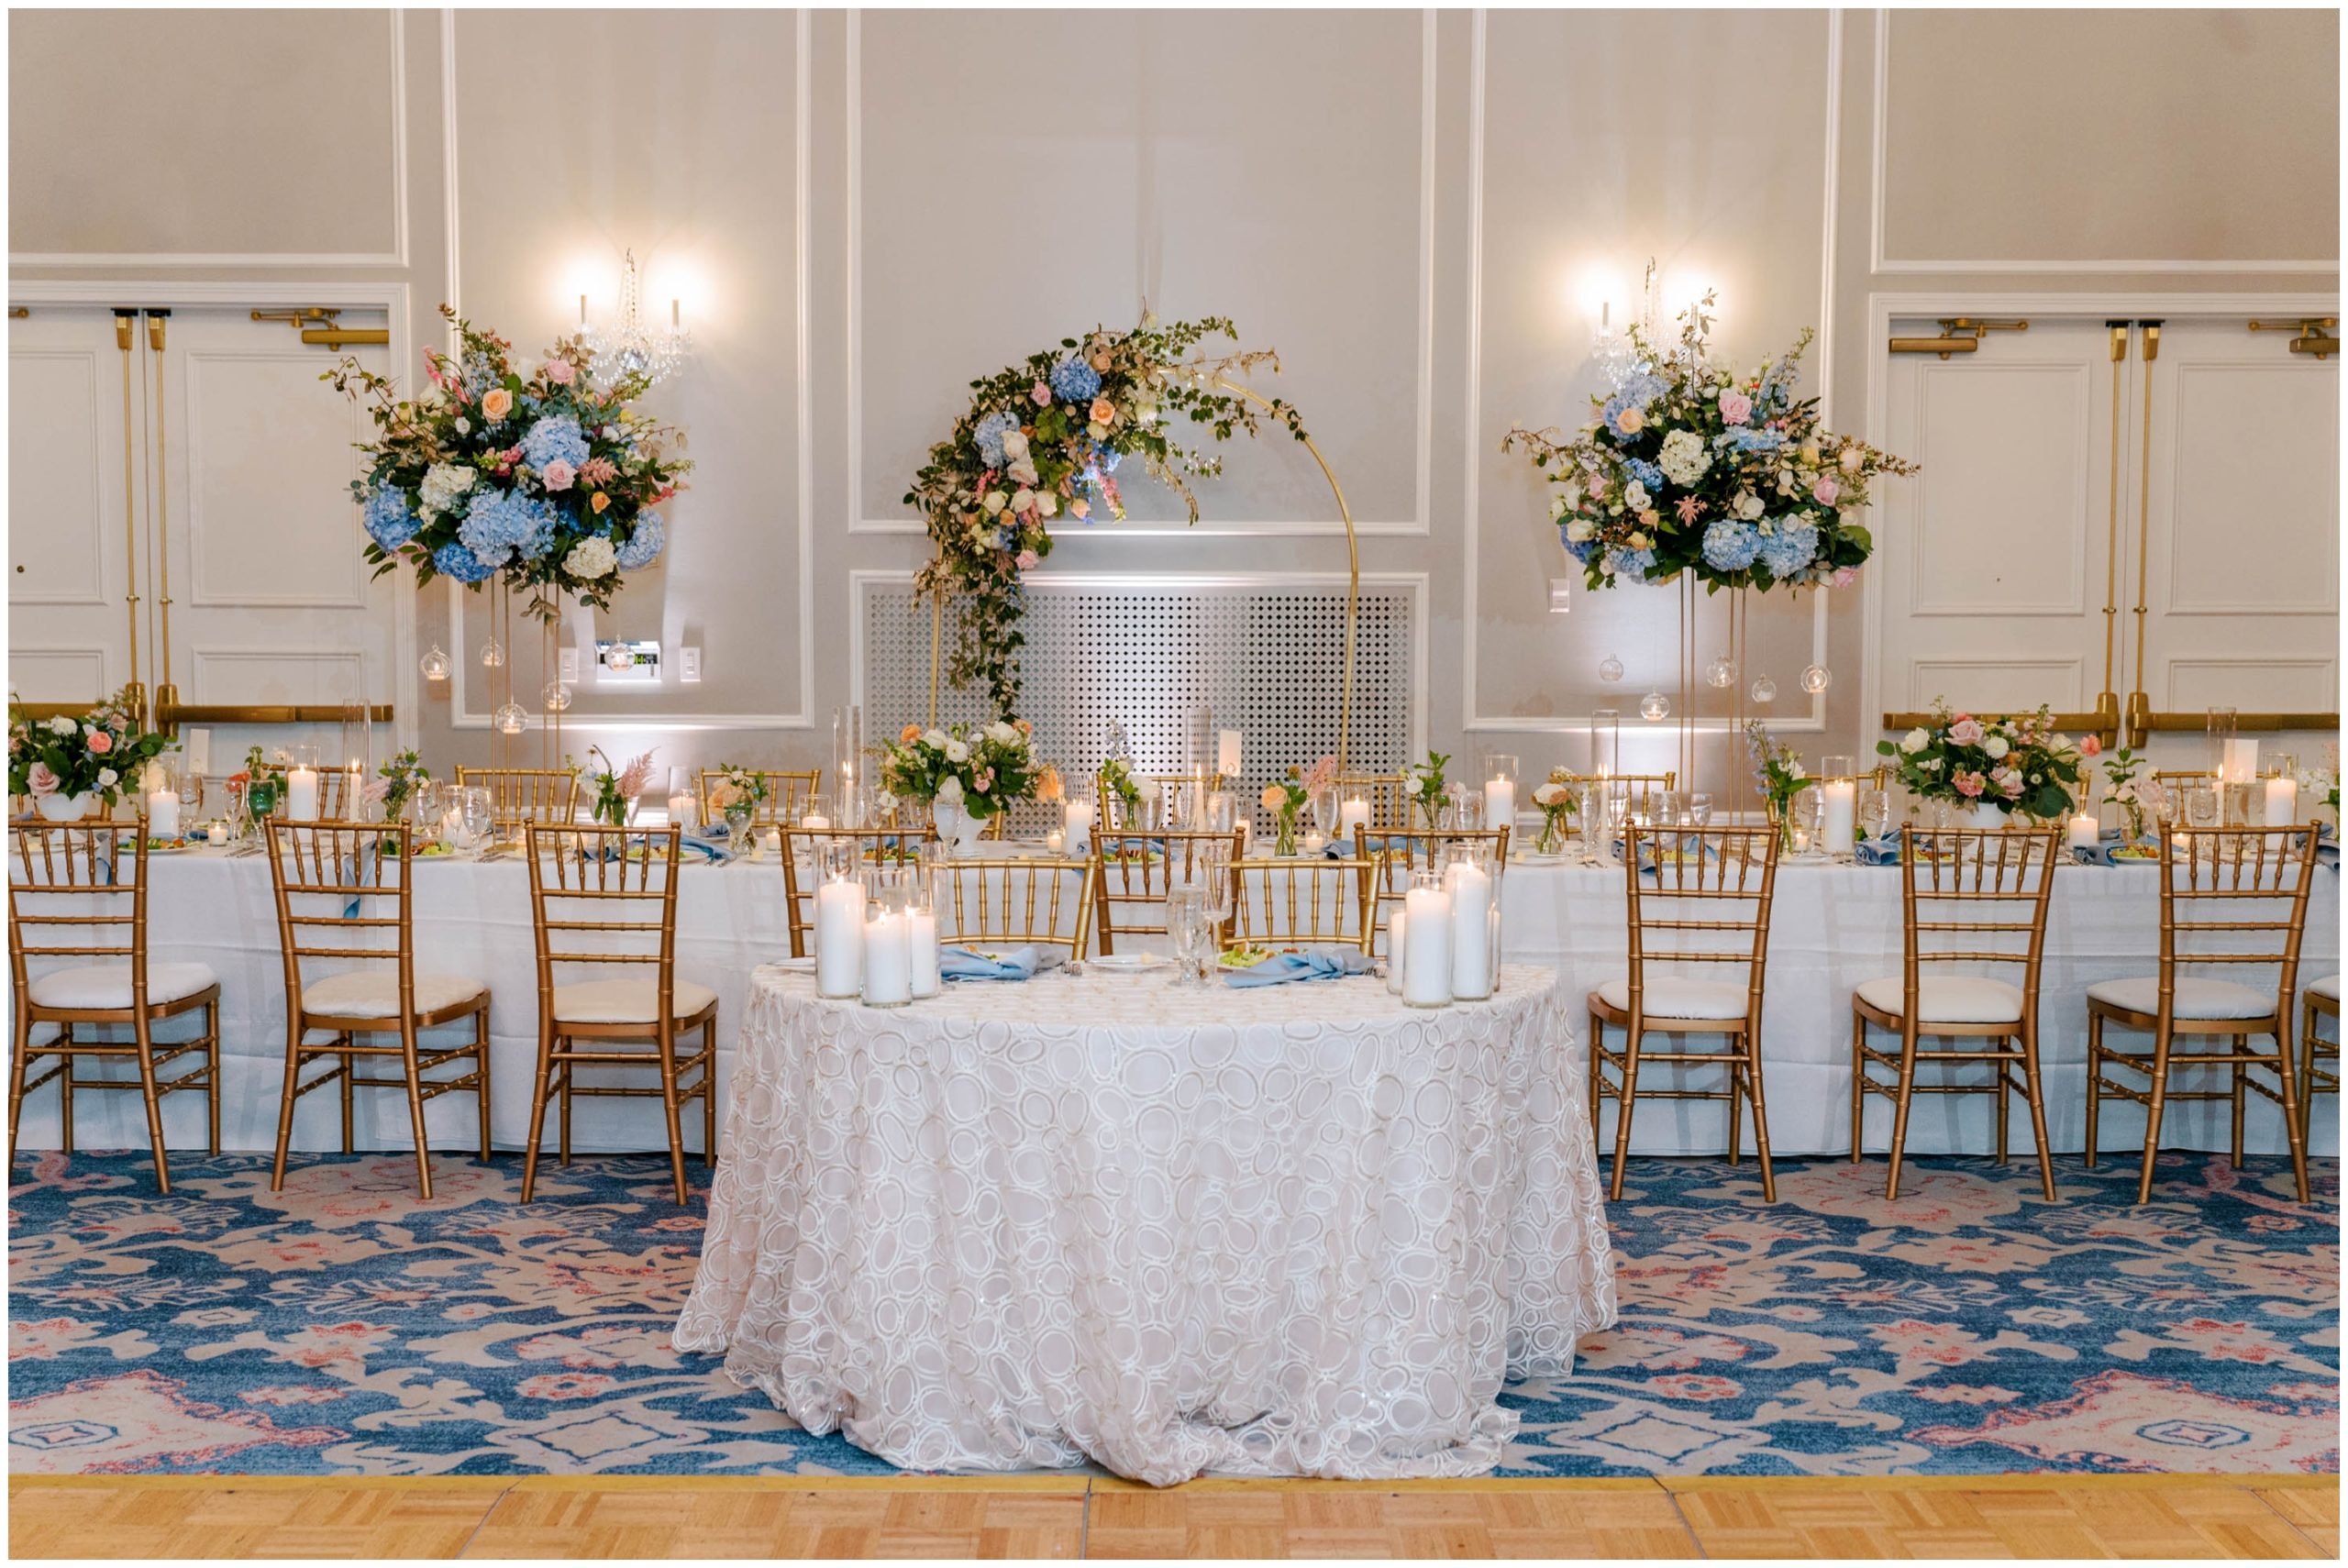 Gold Chiavari chairs, white table linens, pink and blue florals, and white pillar candles for a summer pastel wedding reception